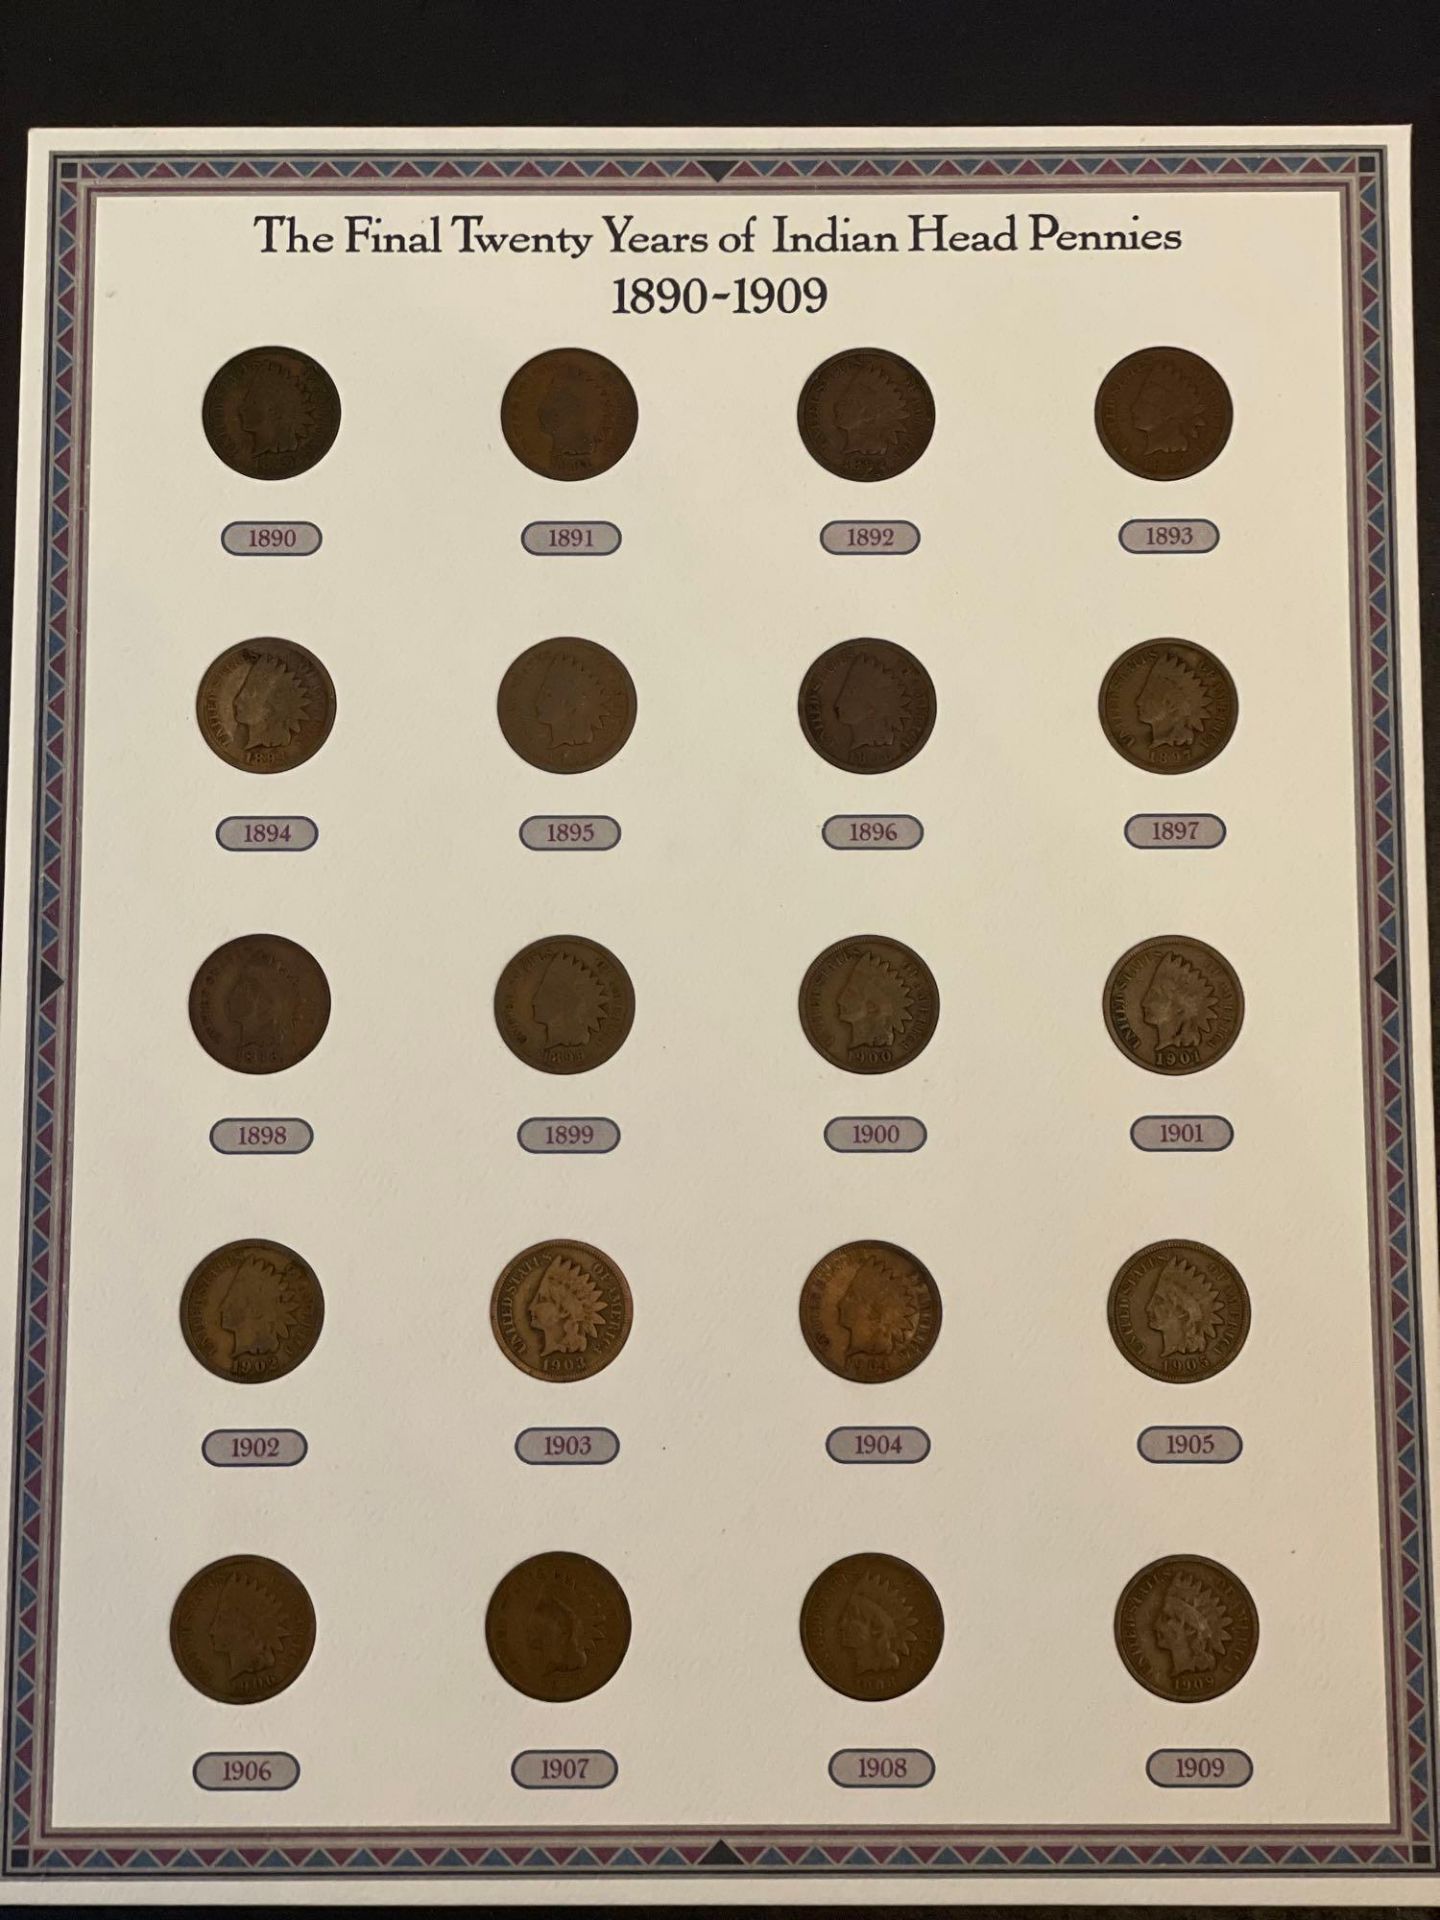 The Last 20 Years of Indian Head Pennies 1890-1909 - Image 4 of 8